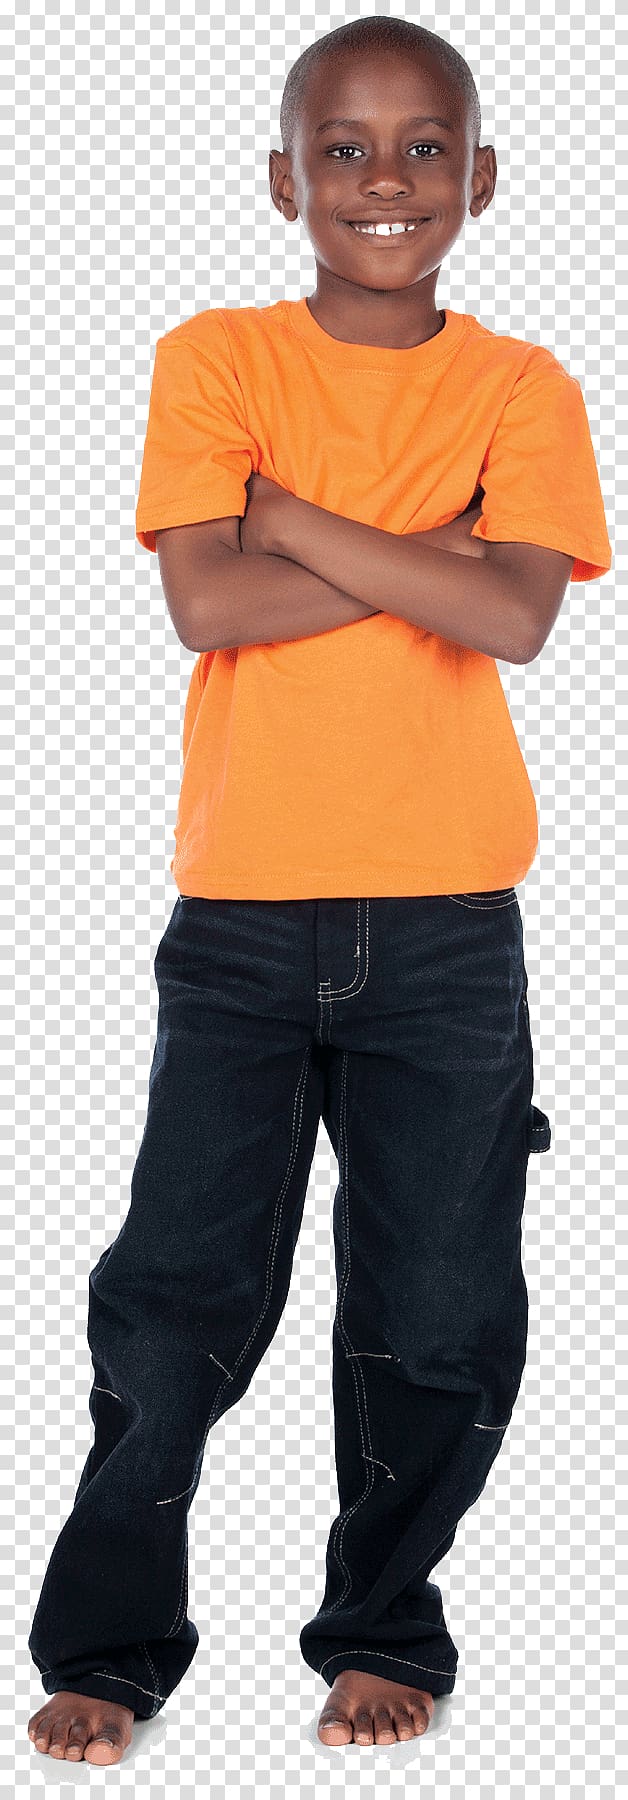 boy with arms crossed while smiling, T-shirt Boy Child African American, CHILD transparent background PNG clipart